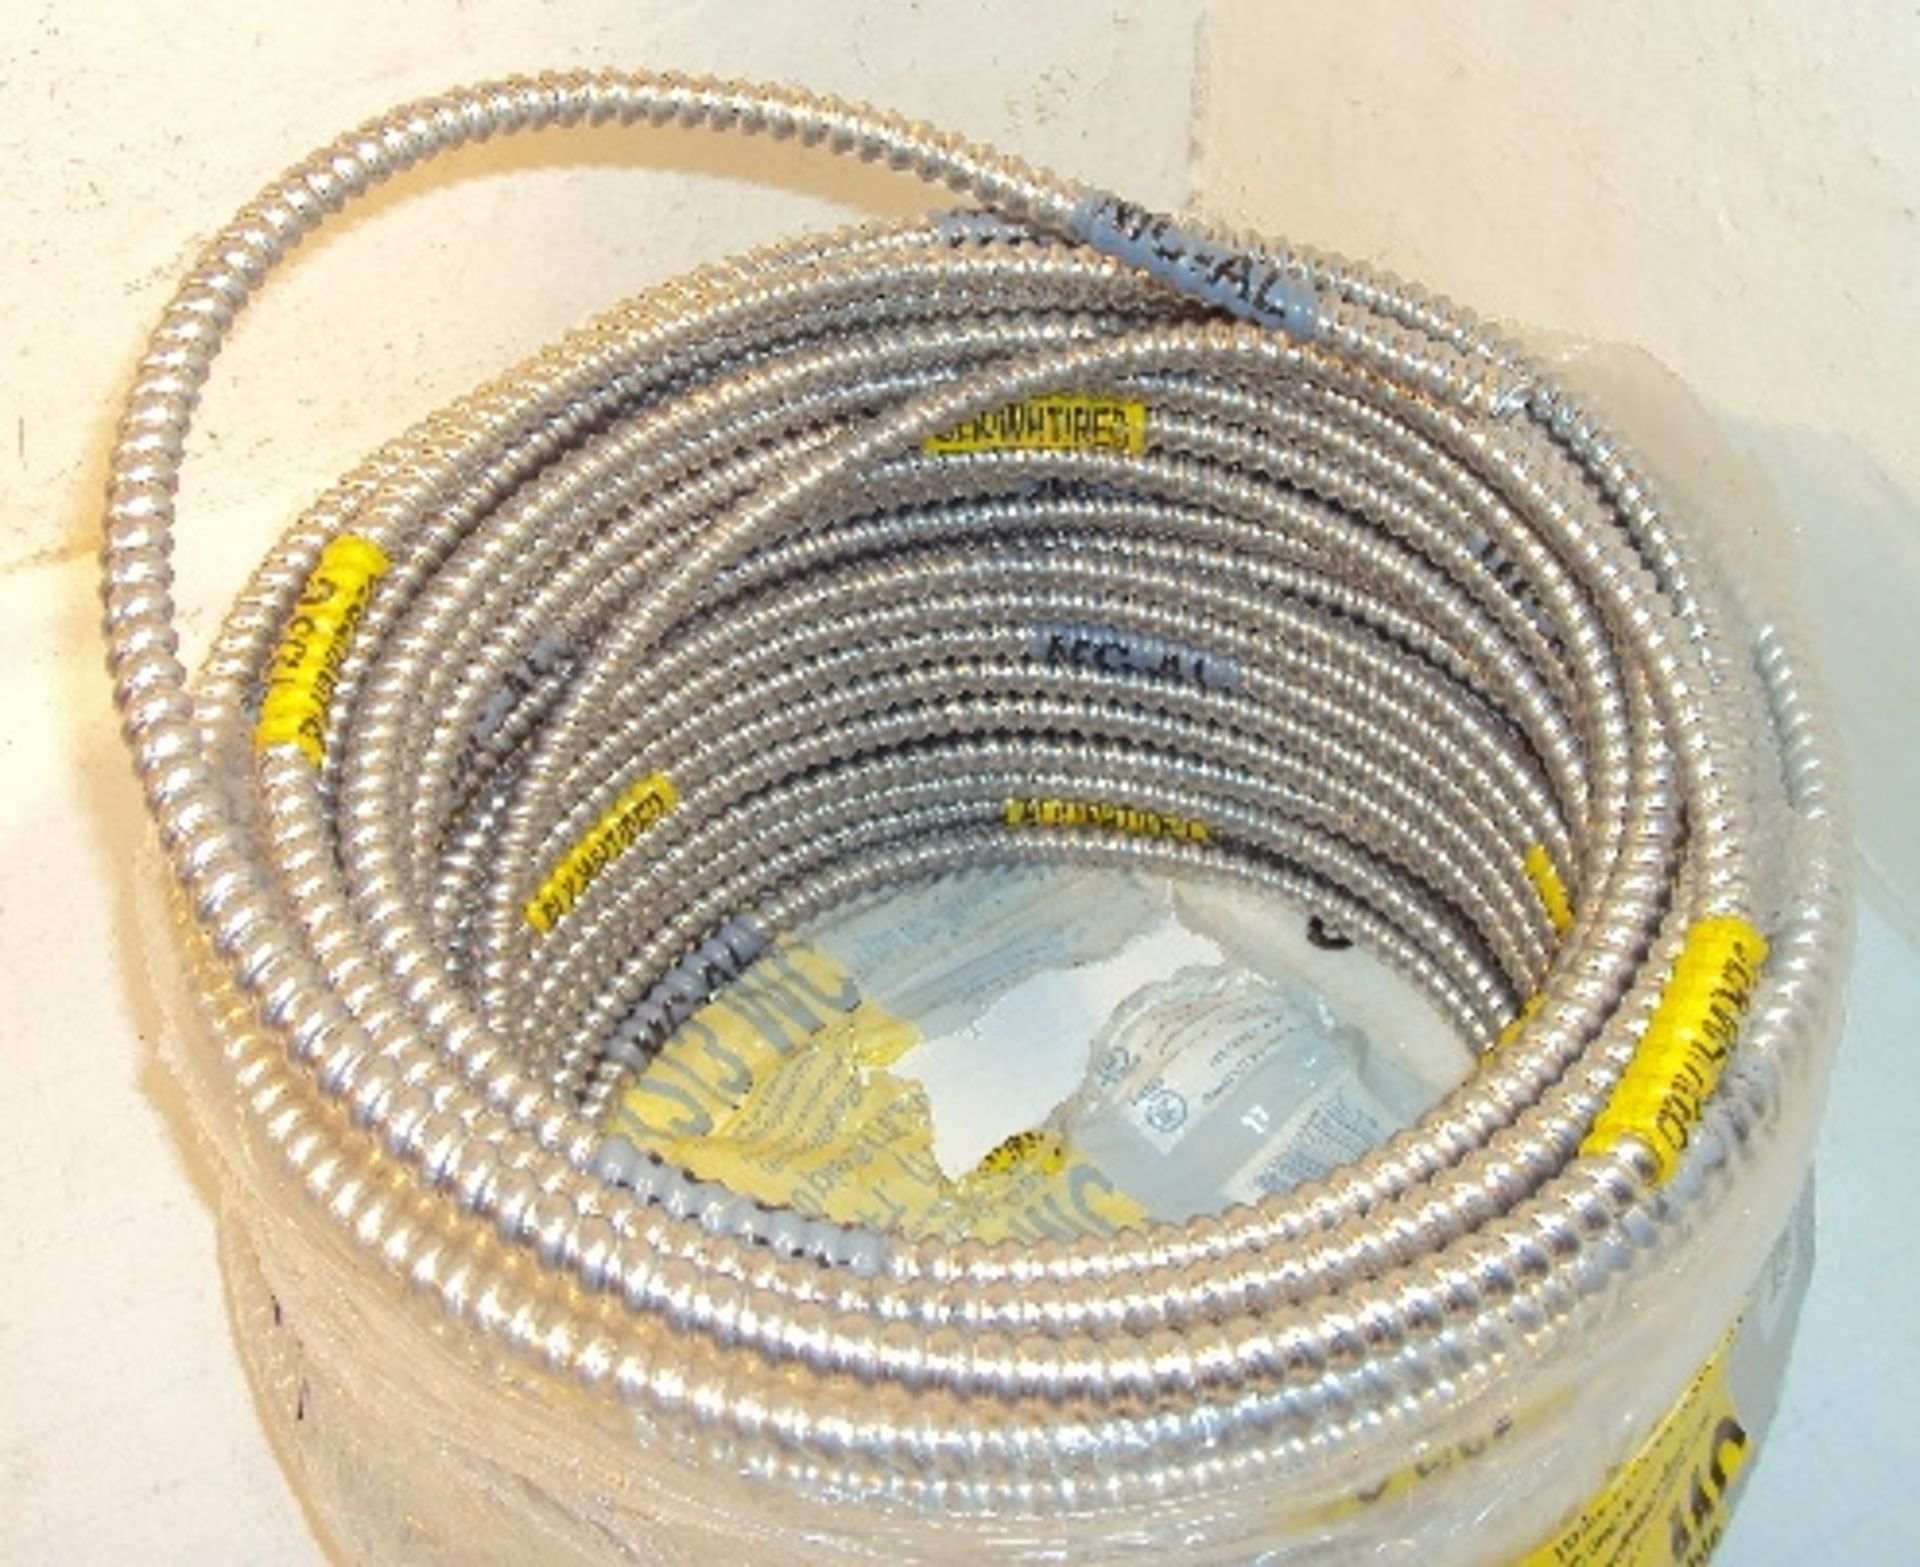 APPRX. 250' COIL ARMOR METAL CLAD 12/3 CABLE - Image 3 of 4